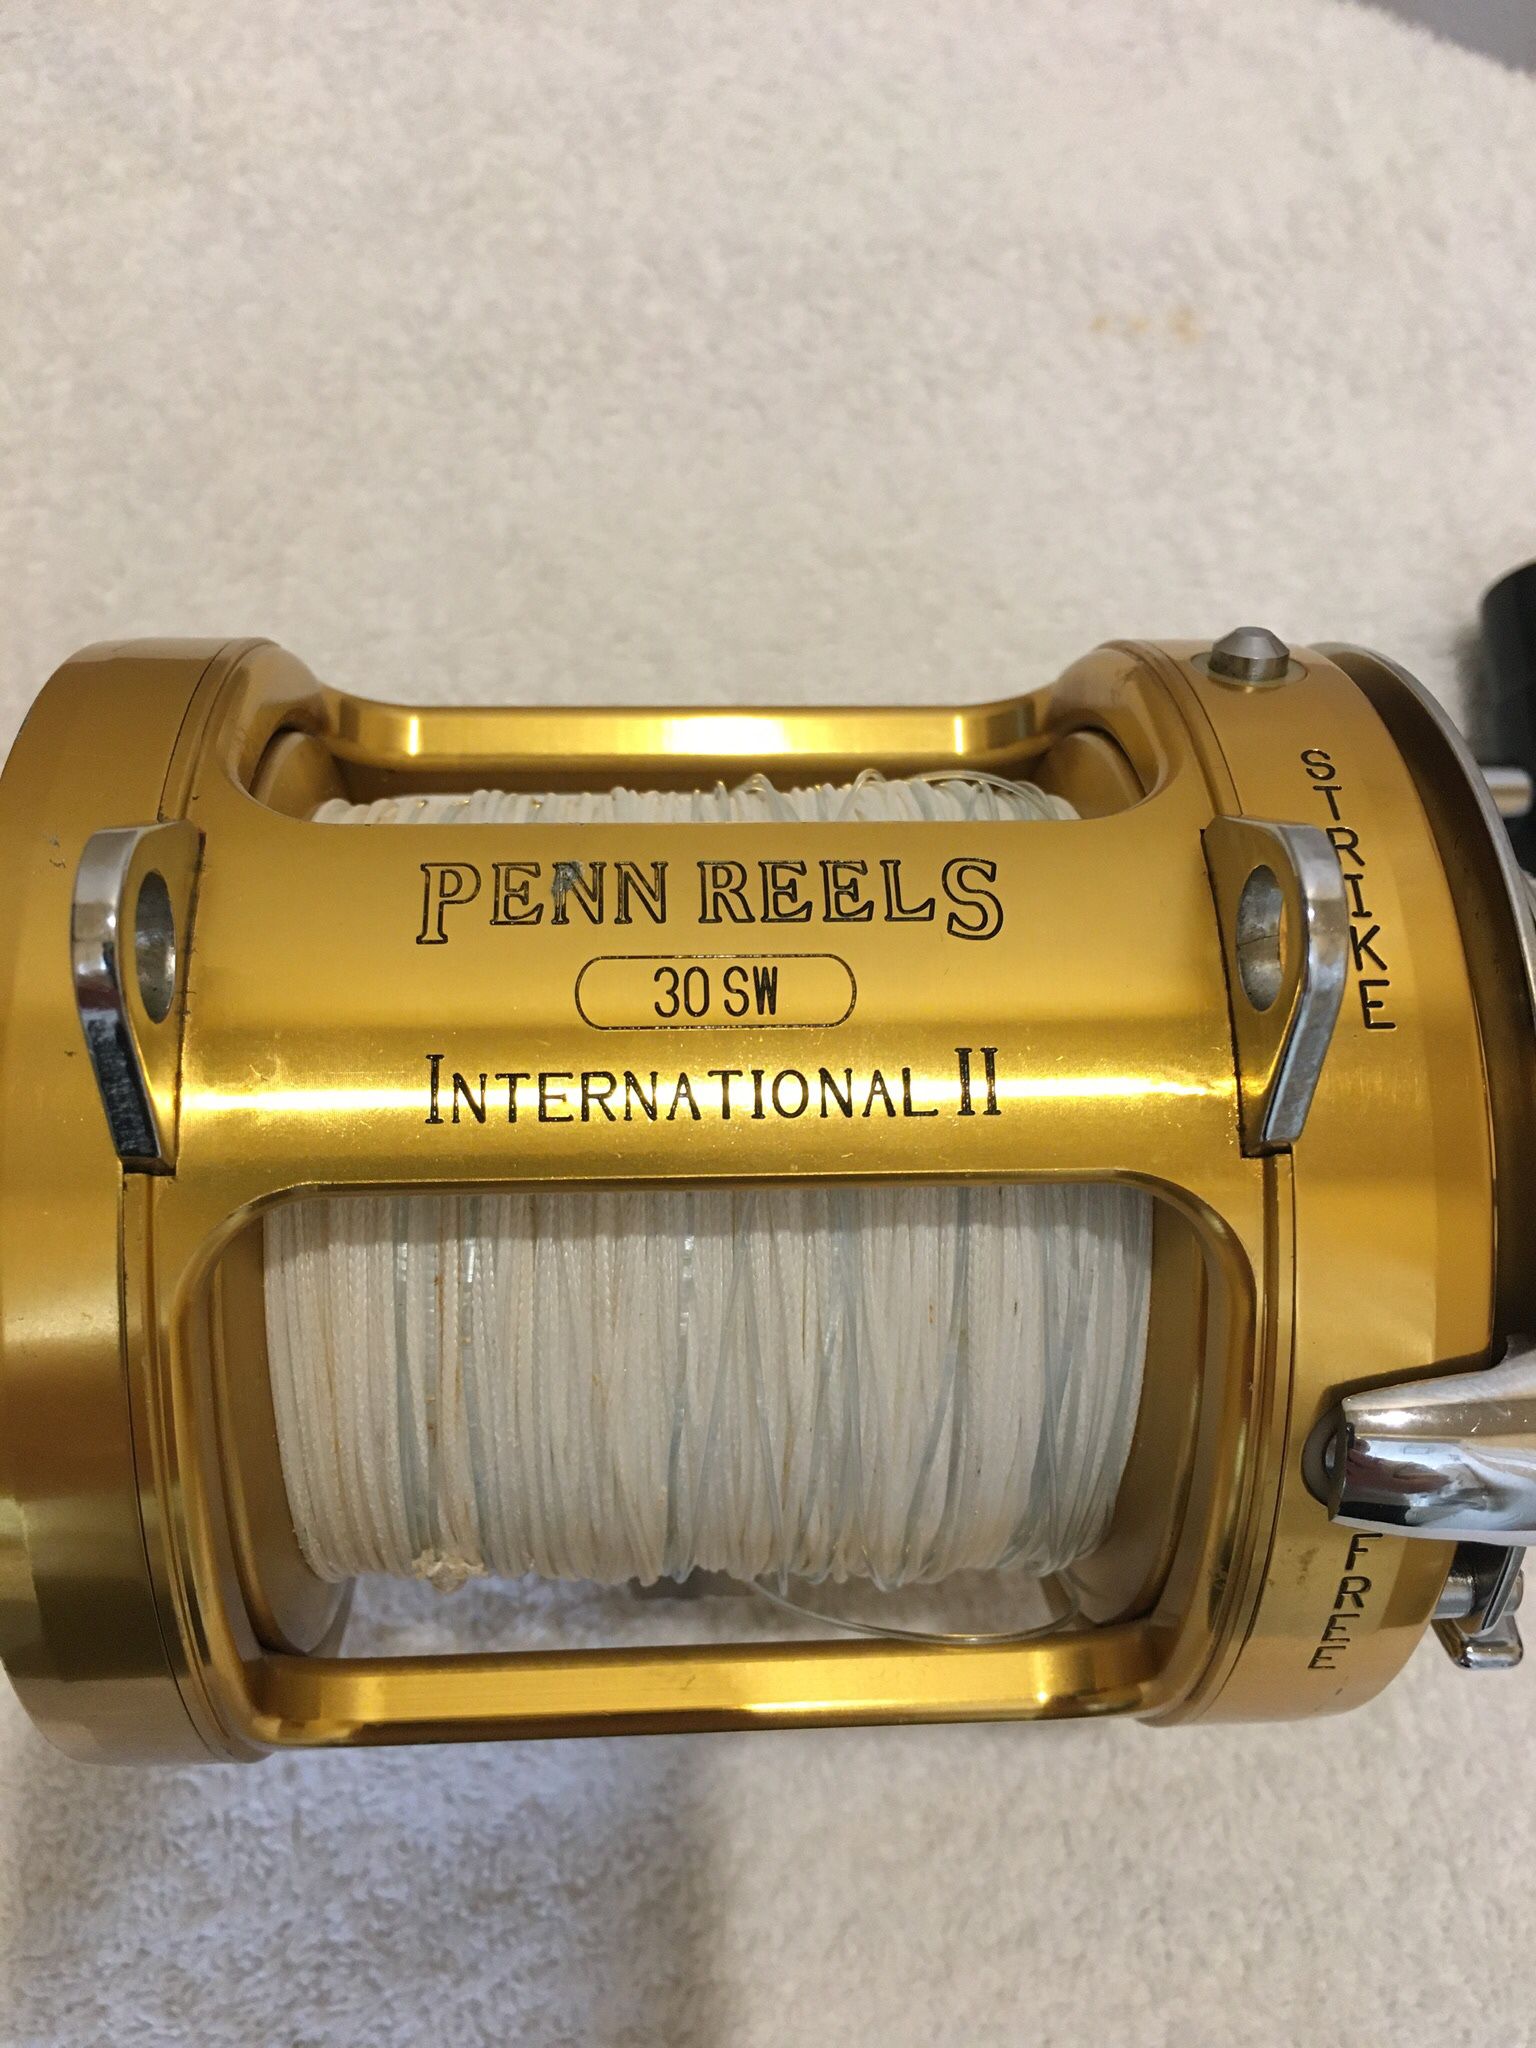 Penn 4300SS Spinning Fishing Reel for Sale in Long Beach, CA - OfferUp